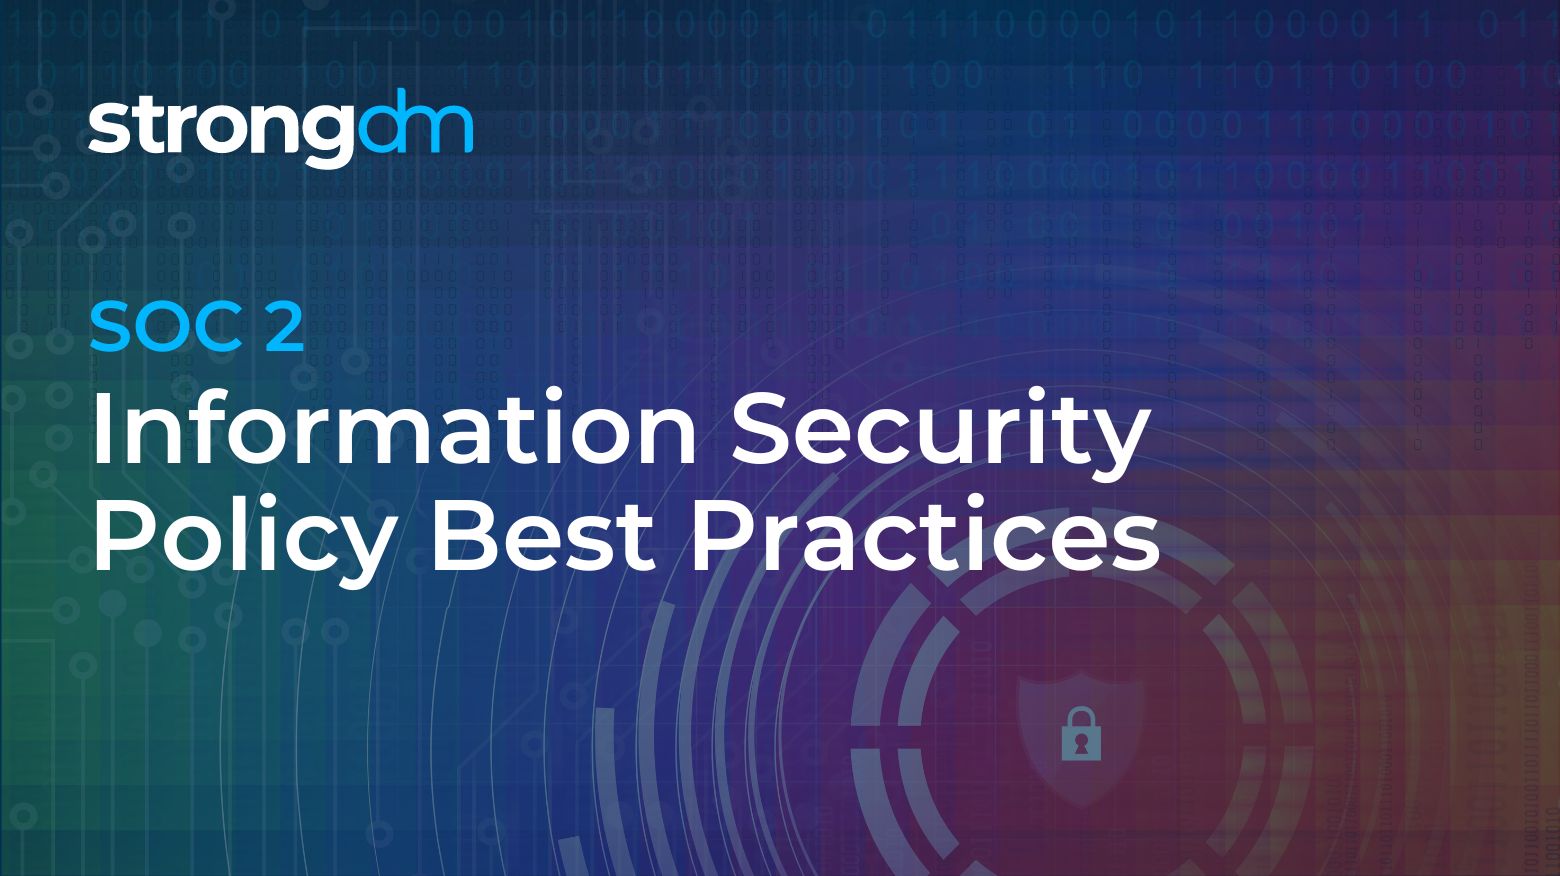 Information Security Policy Best Practices